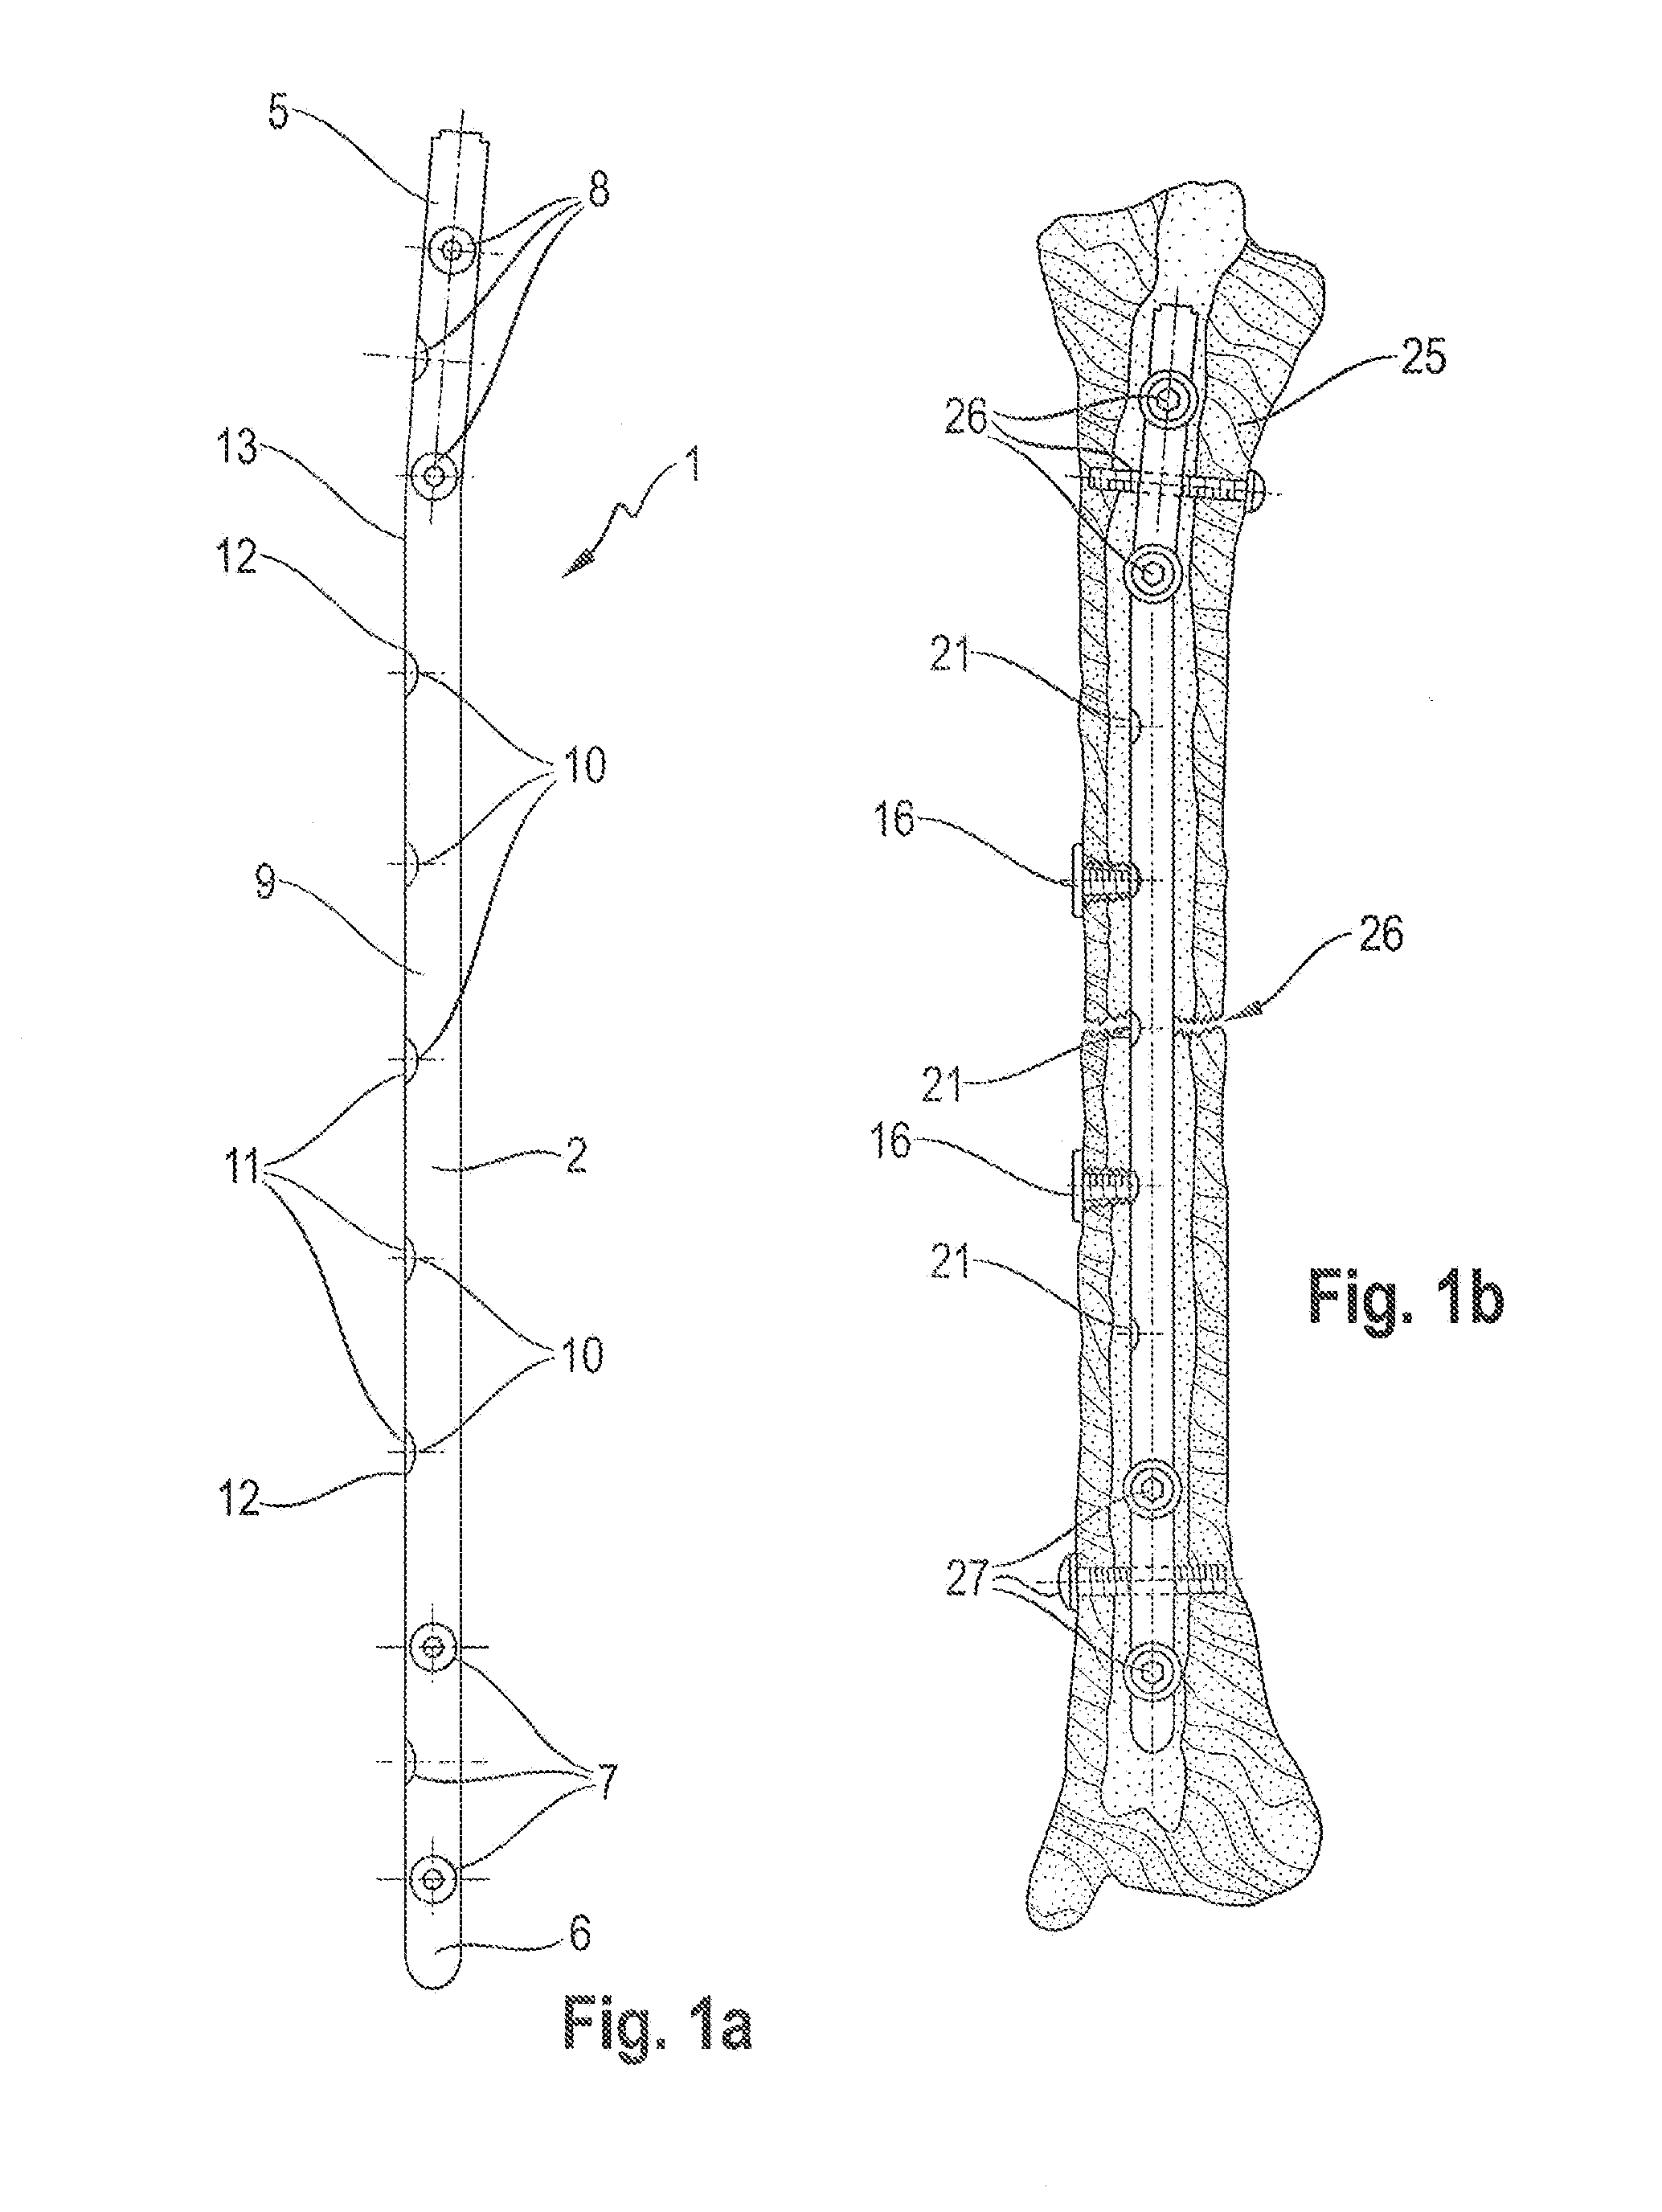 Osteosynthesis system for the multidirectional, angular-stable treatment of fractures of tubular bones comprising an intramedullary nail and bone screws